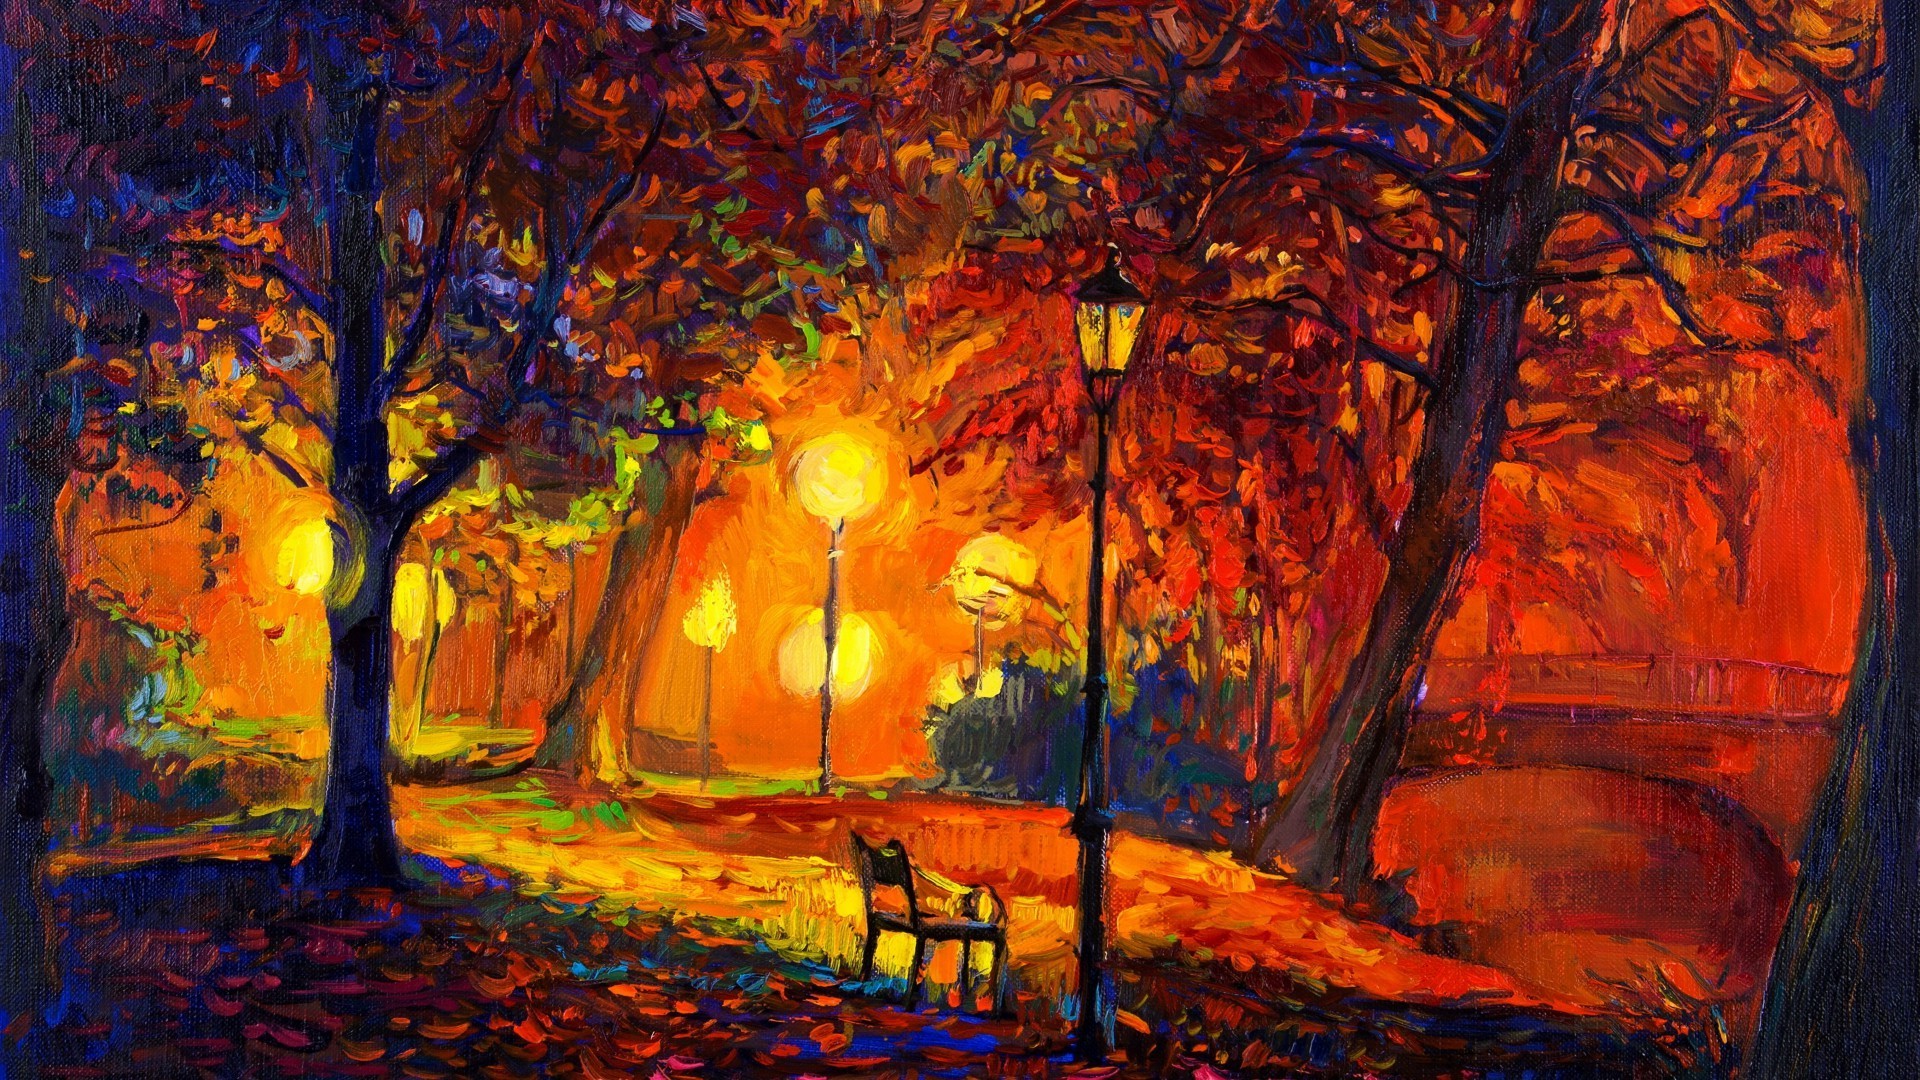 digital Art, Nature, Trees, Painting, Park, Bench, Lamps, Fall, Leaves